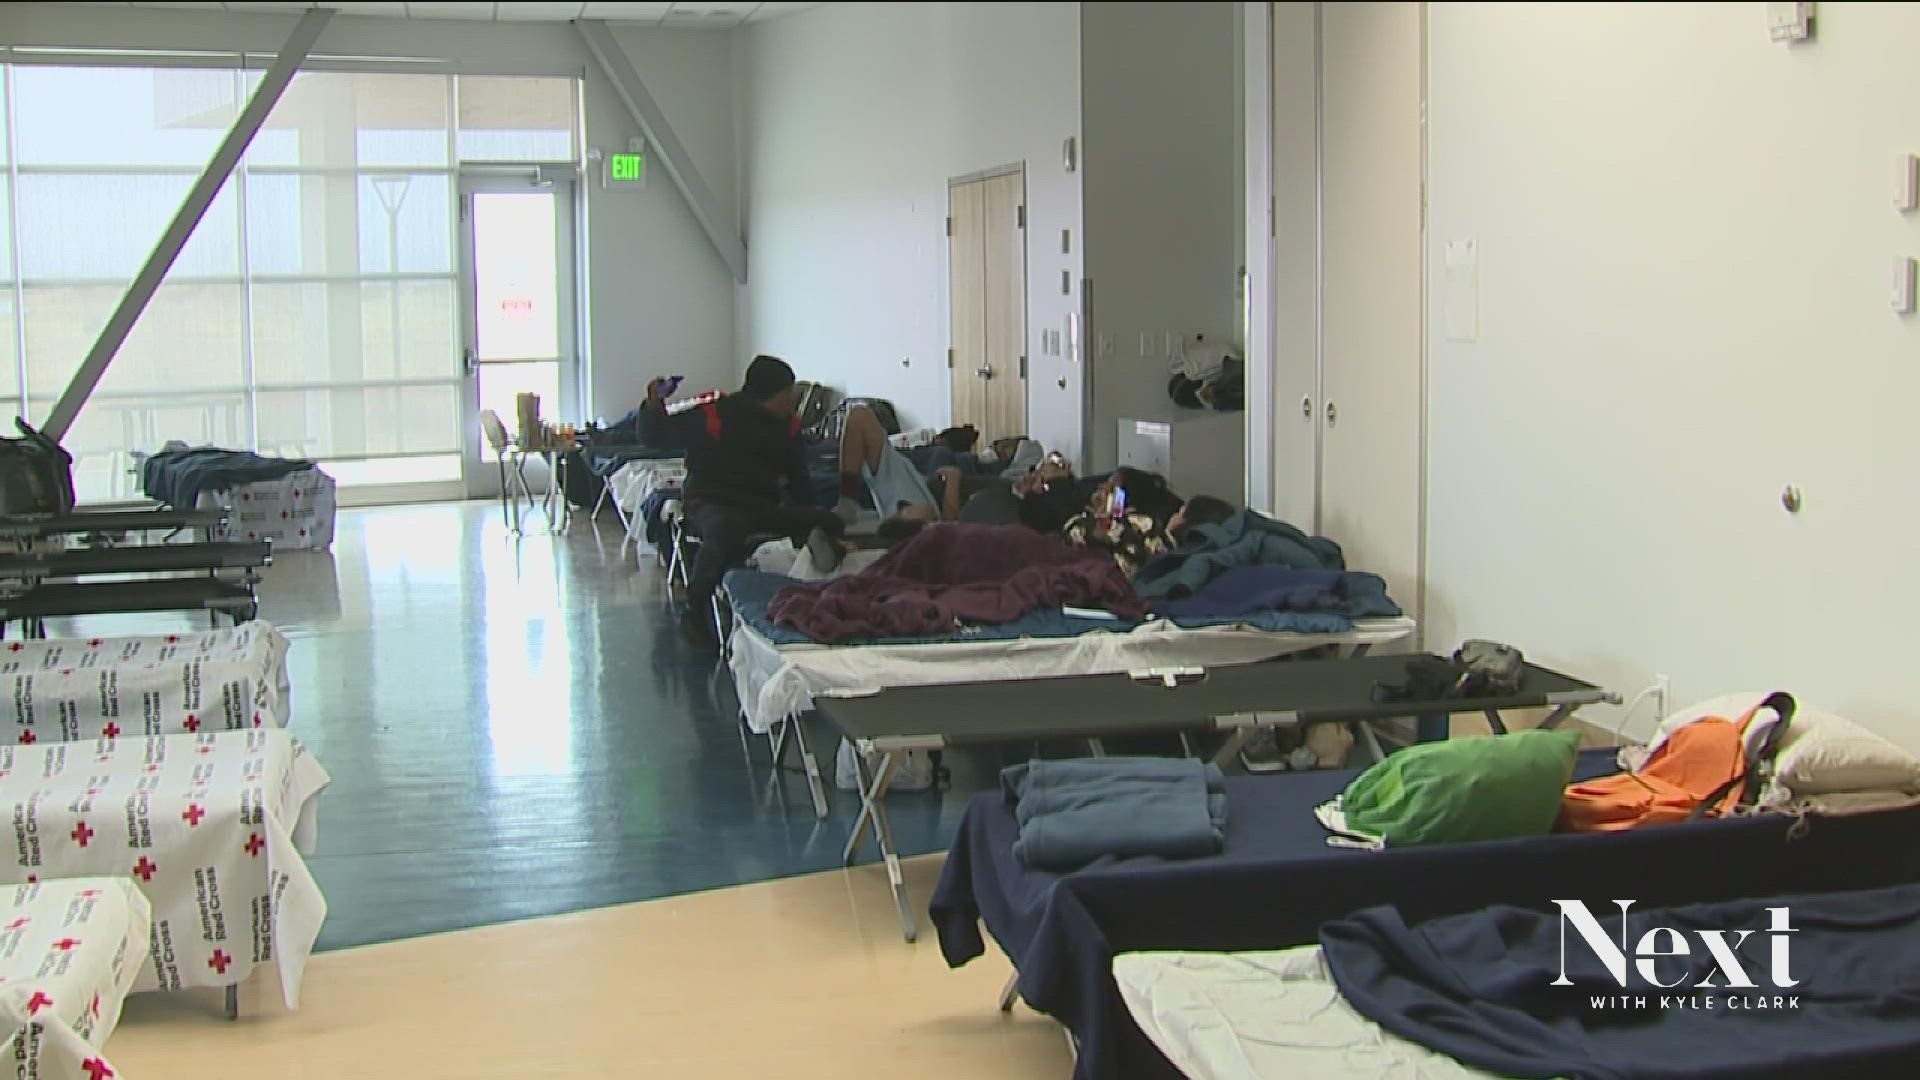 As 175 migrants arrived in the city of Denver overnight, and the city’s statistics show 101 migrants were added to the city’s emergency shelters in the same time.